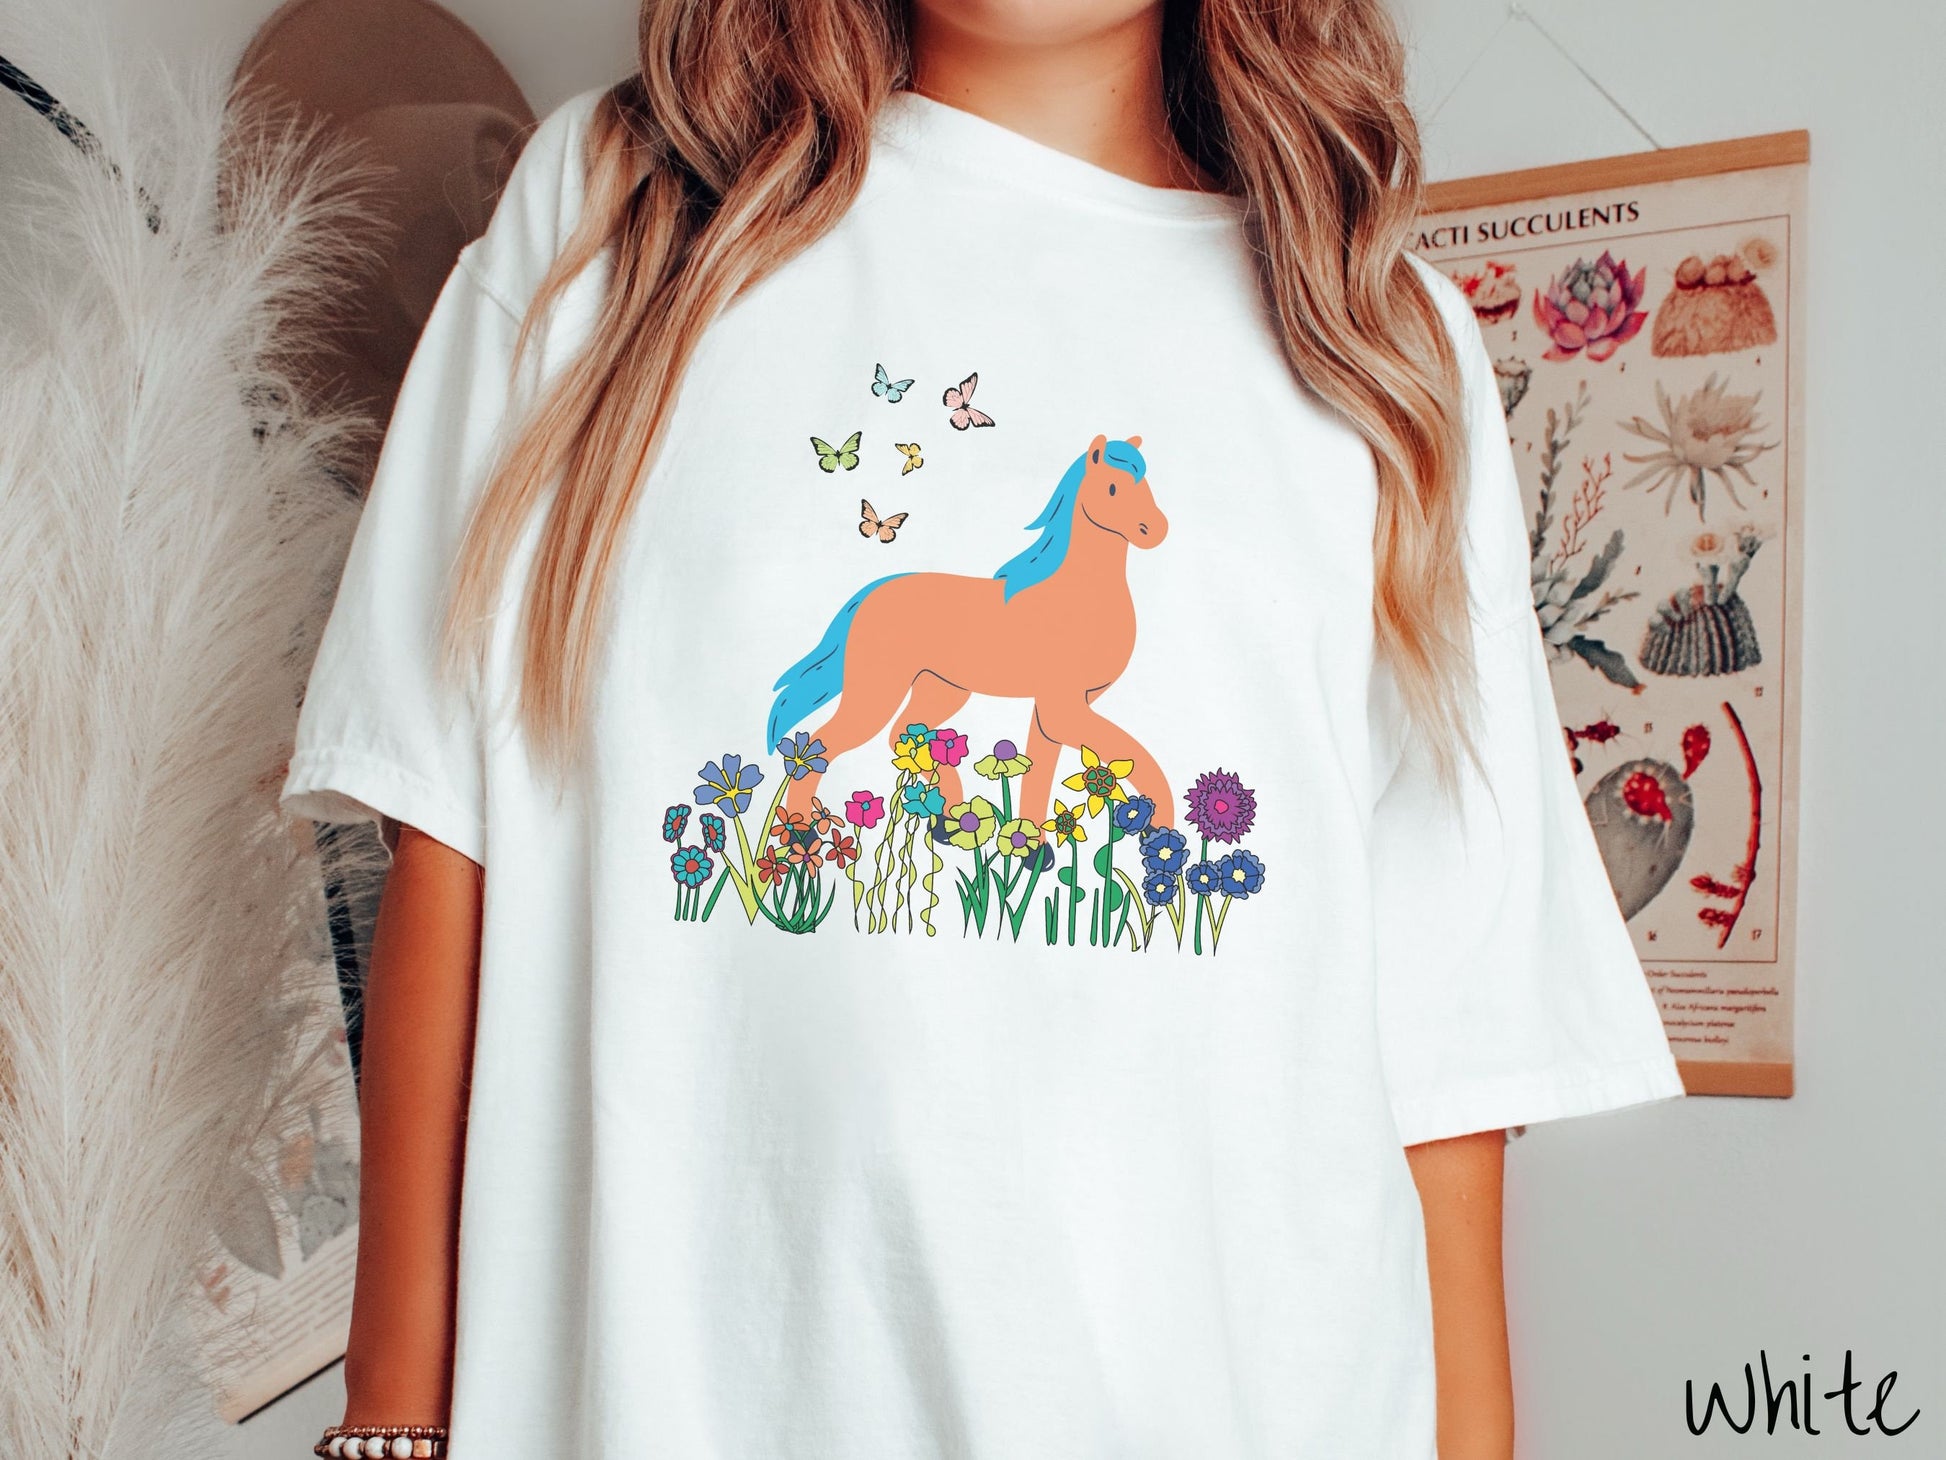 A woman wearing a cute, vintage white colored Comfort Colors shirt with a brown horse with blue hair walking through a field of colorful flowers and grass. There are colorful butterflies flying above the horse.